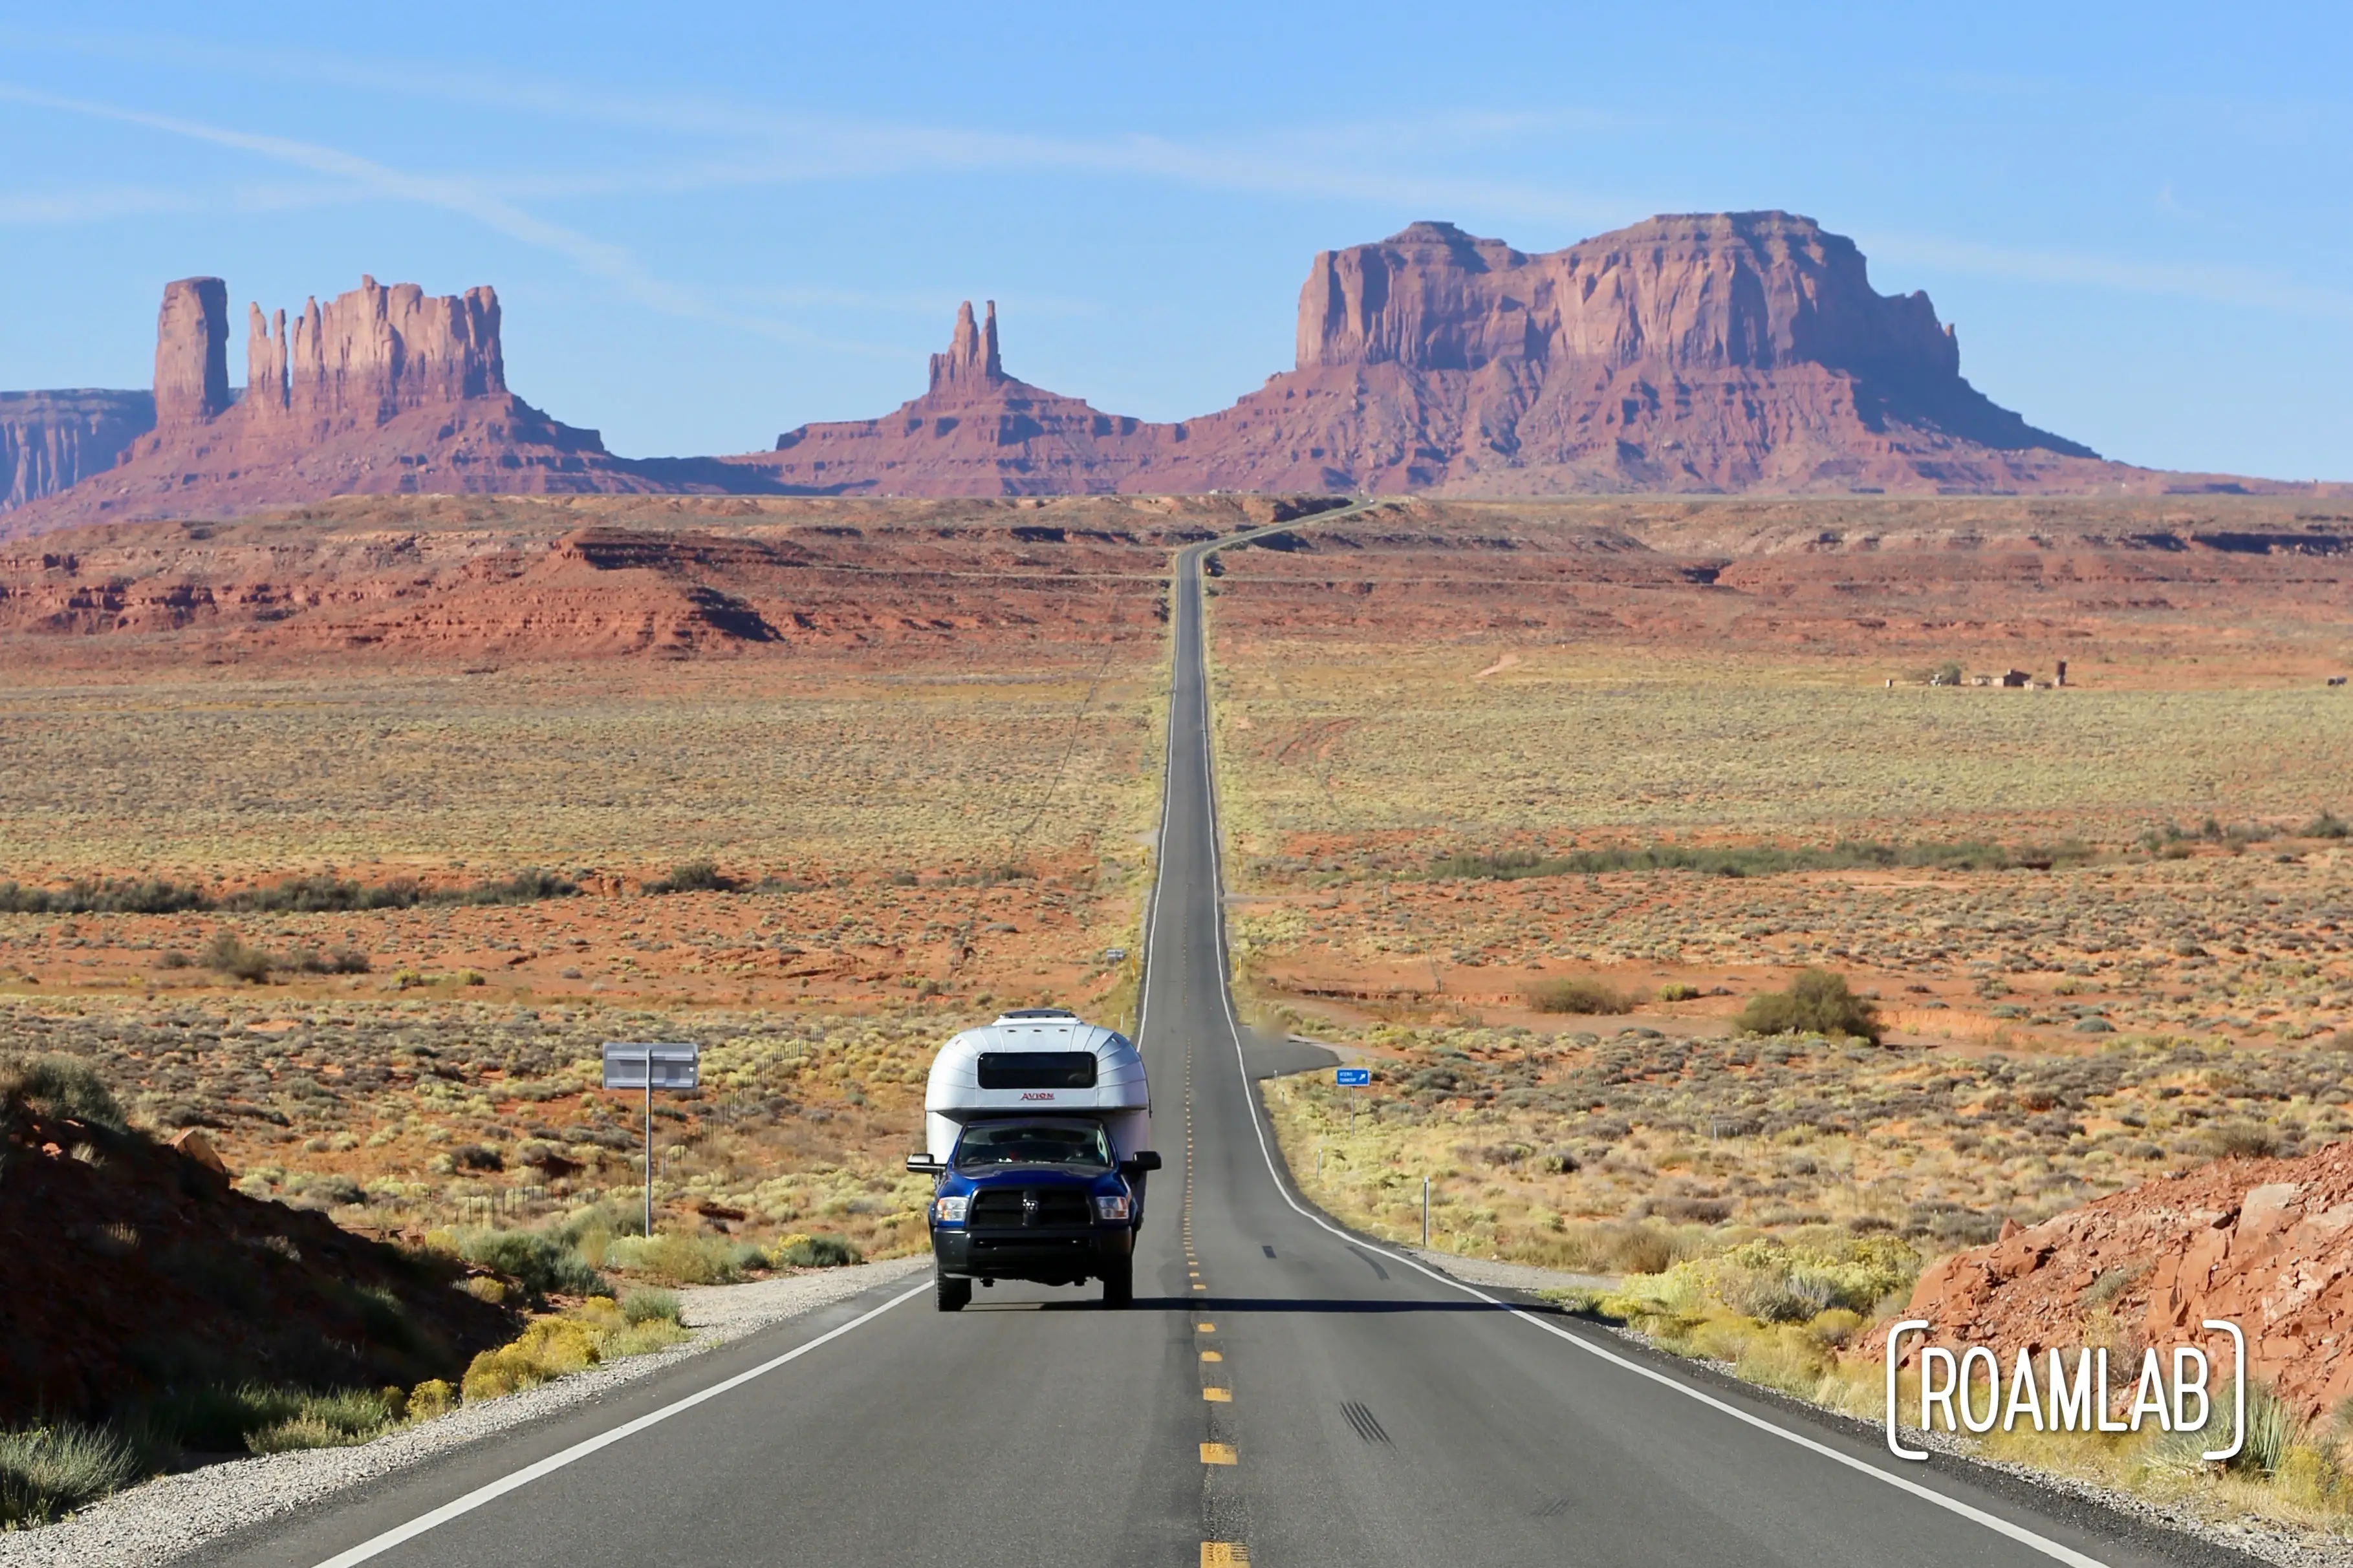 Monument Valley is an incredibly popular film location but few vistas are more iconic than the Forrest Gump Point along Scenic U.S. Highway 163.